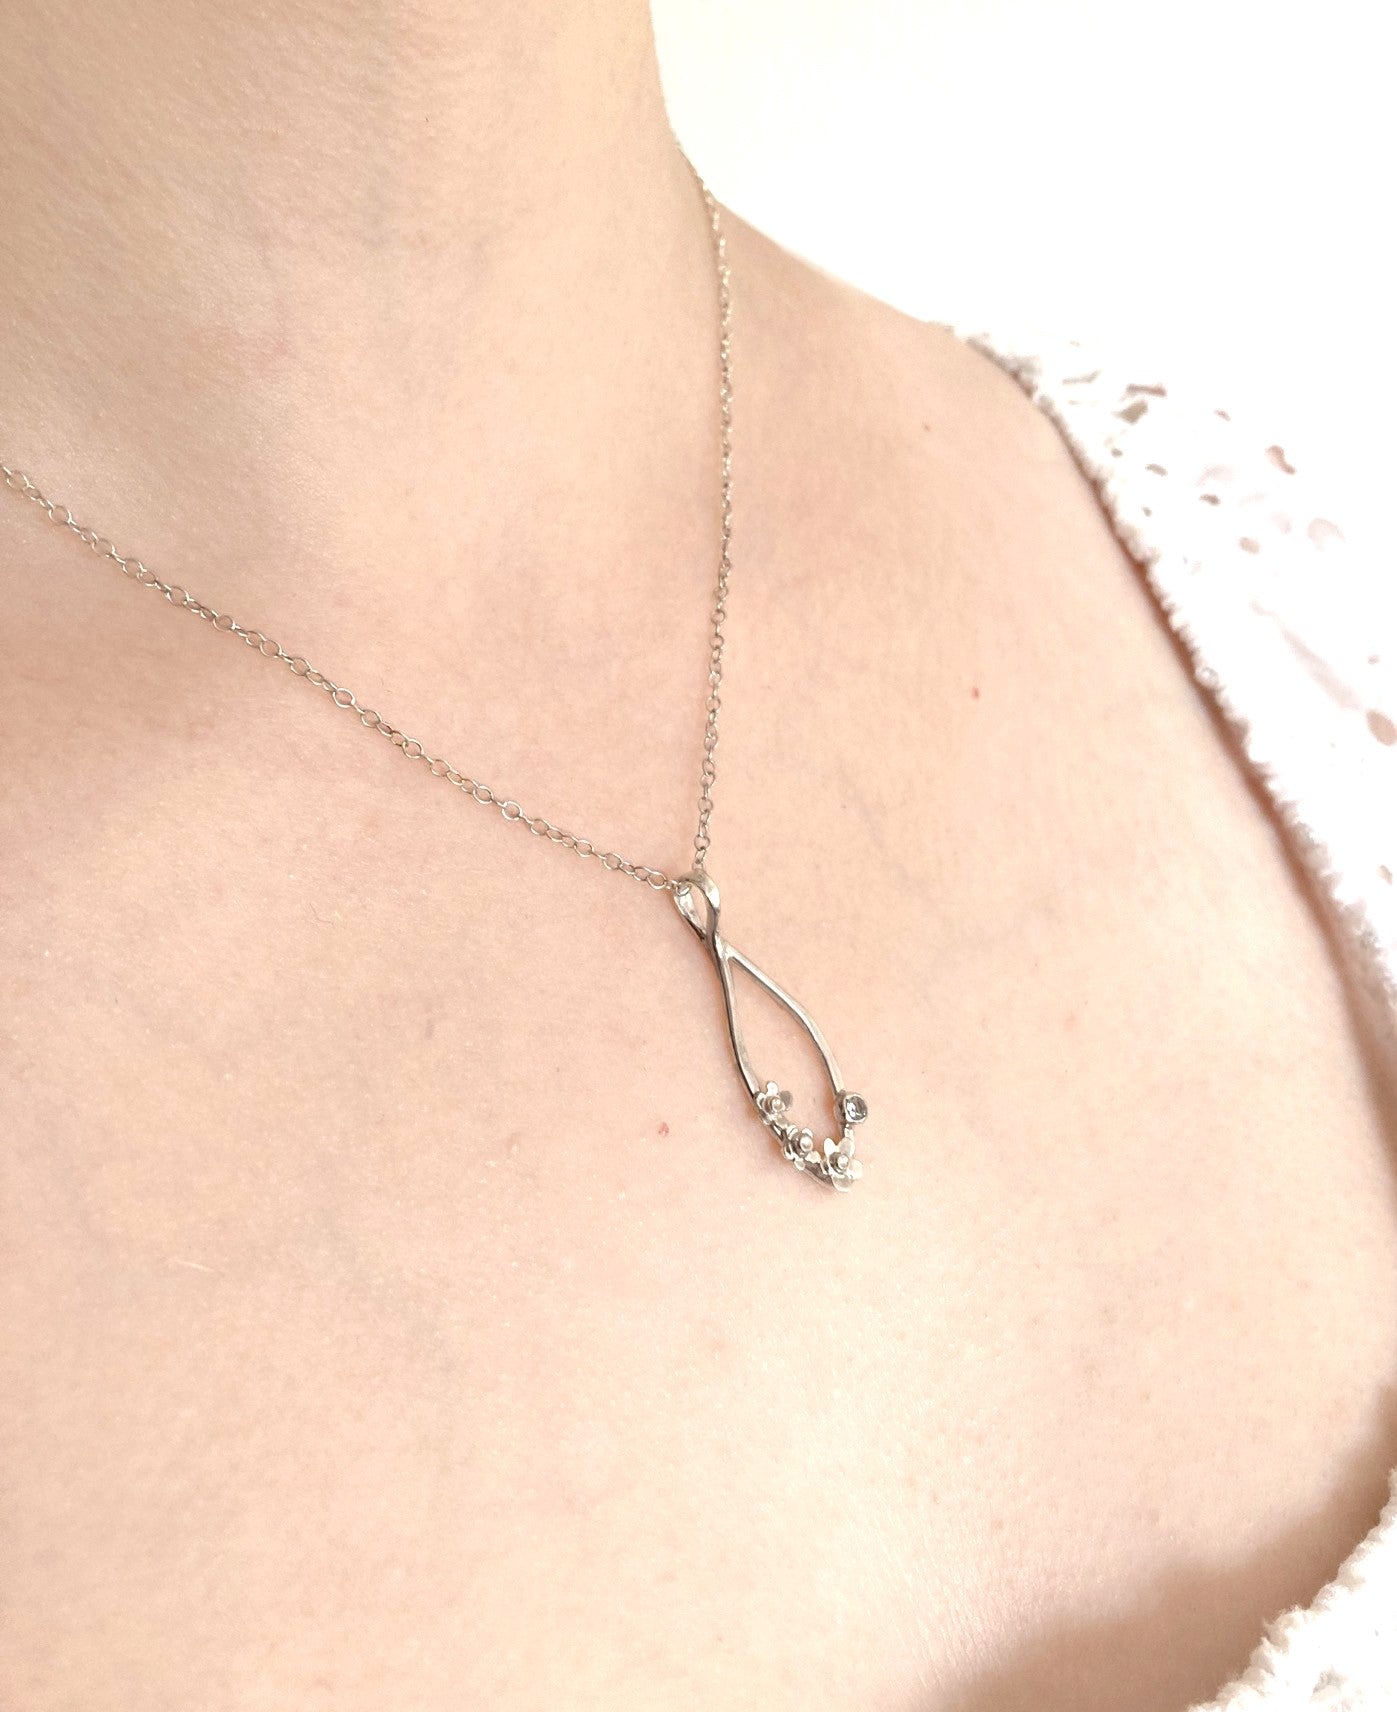 woman's neck wearing silver chain and simple floral drop pendant